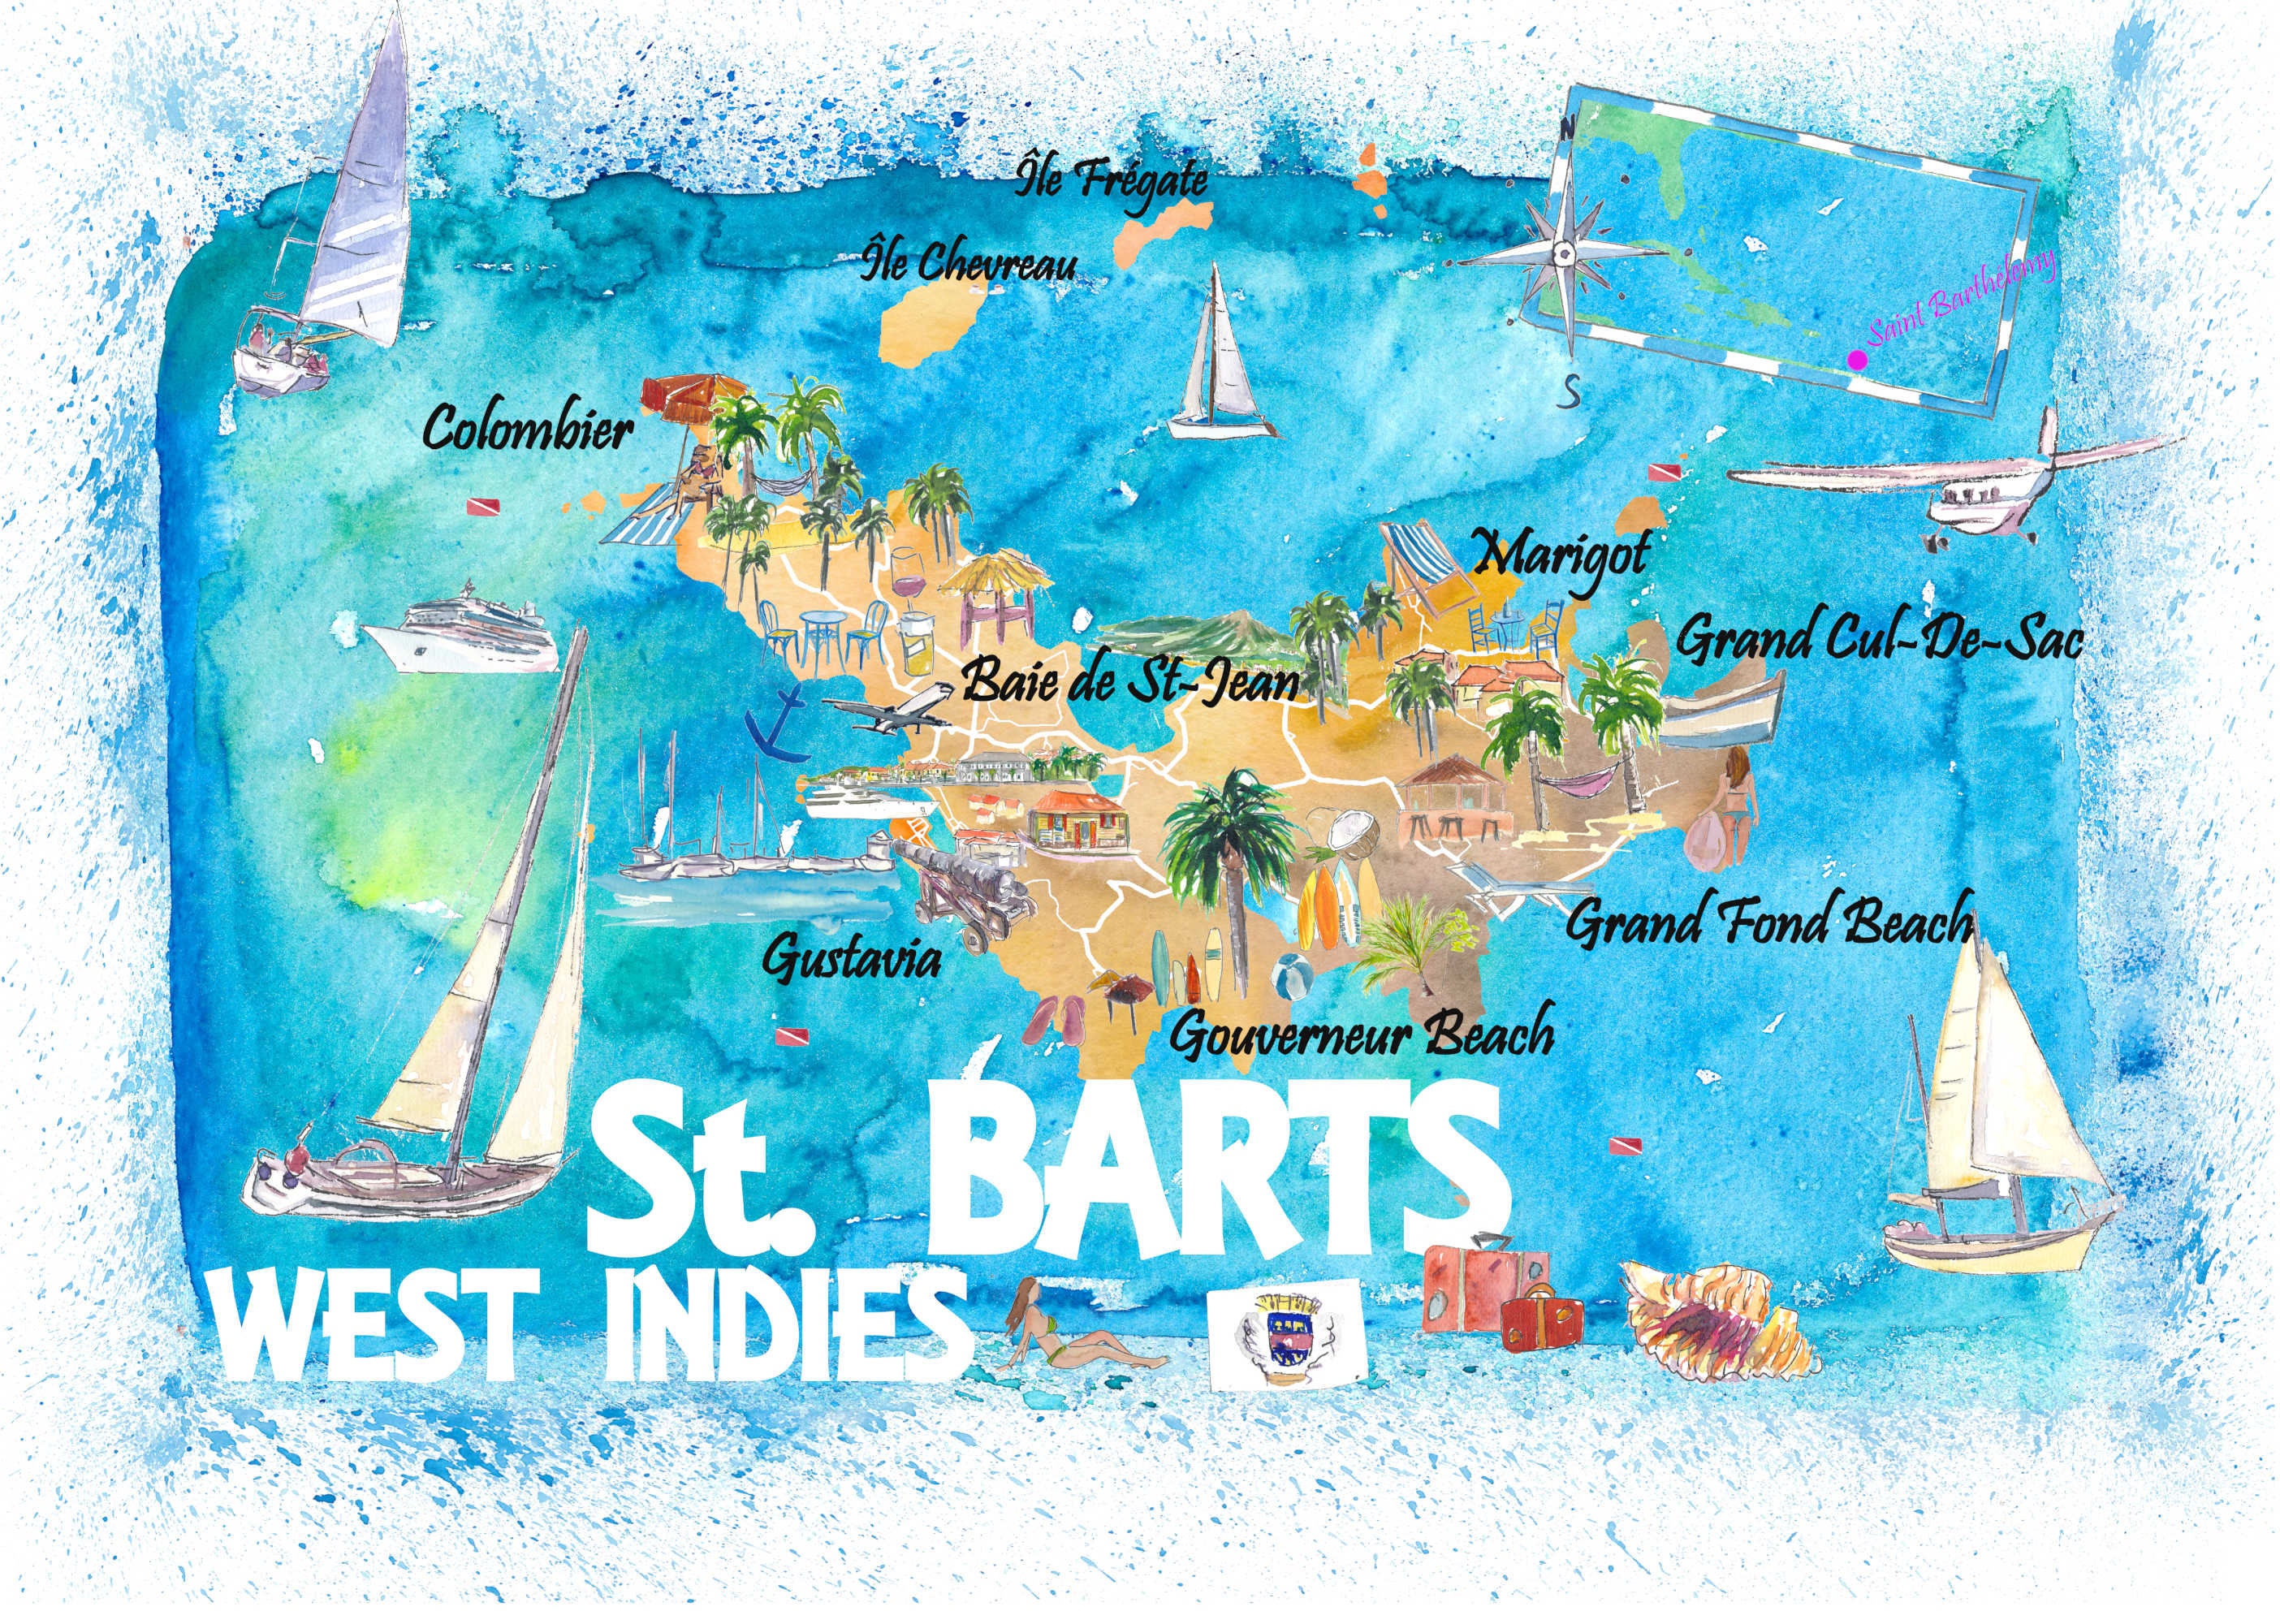 St Barts Antilles Illustrated Caribbean Travel Map With -  Sweden